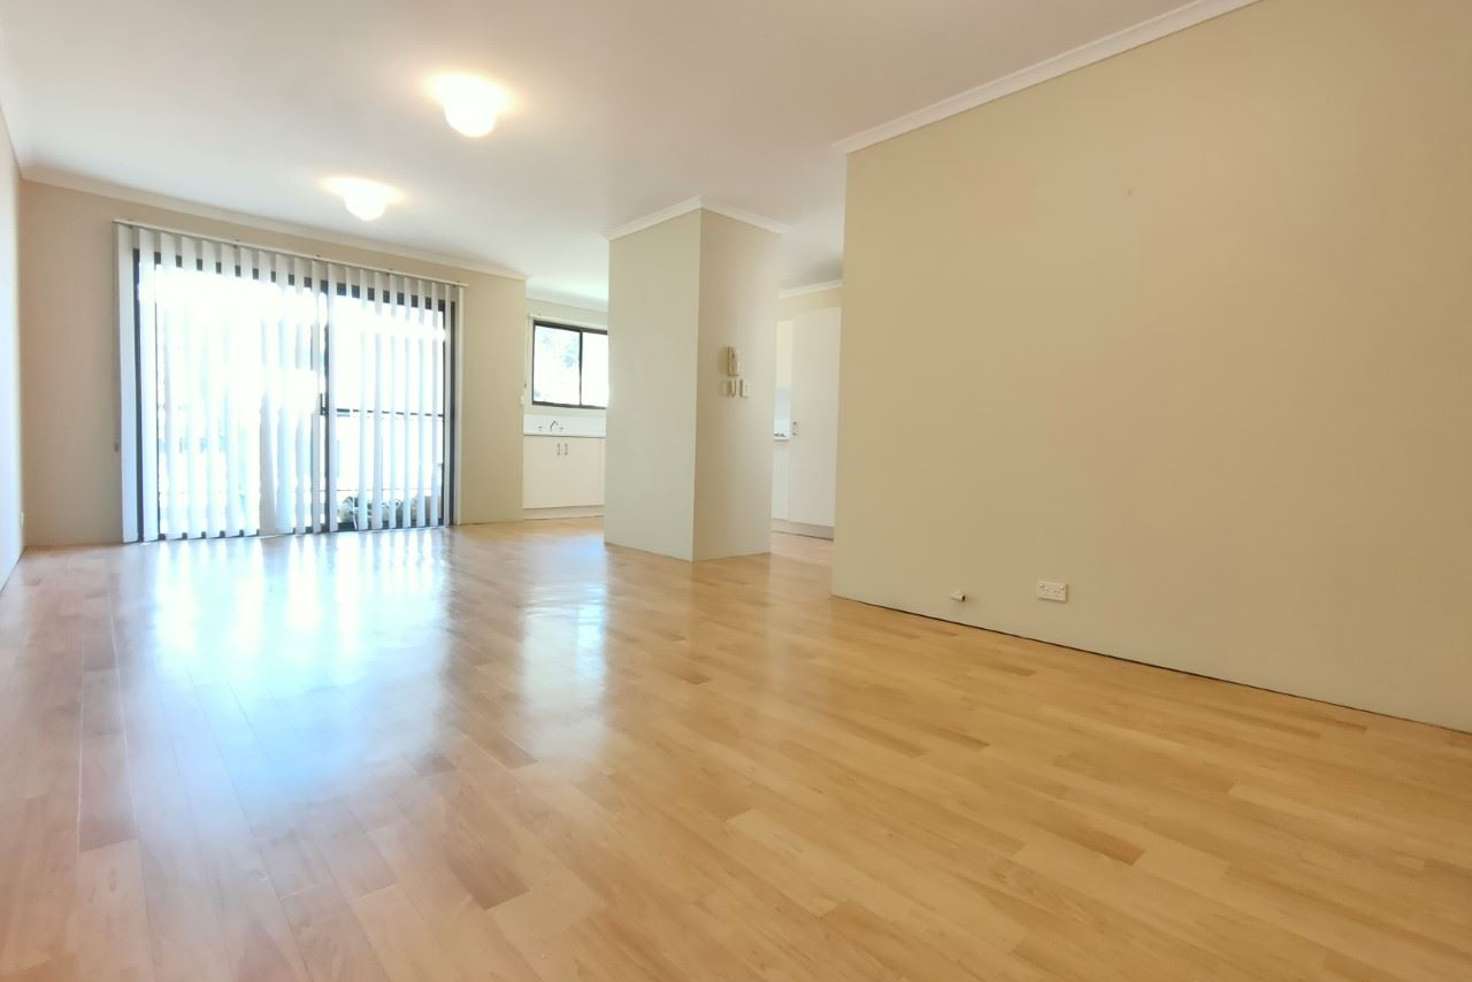 Main view of Homely unit listing, 28/34-36 Hythe Street, Mount Druitt NSW 2770